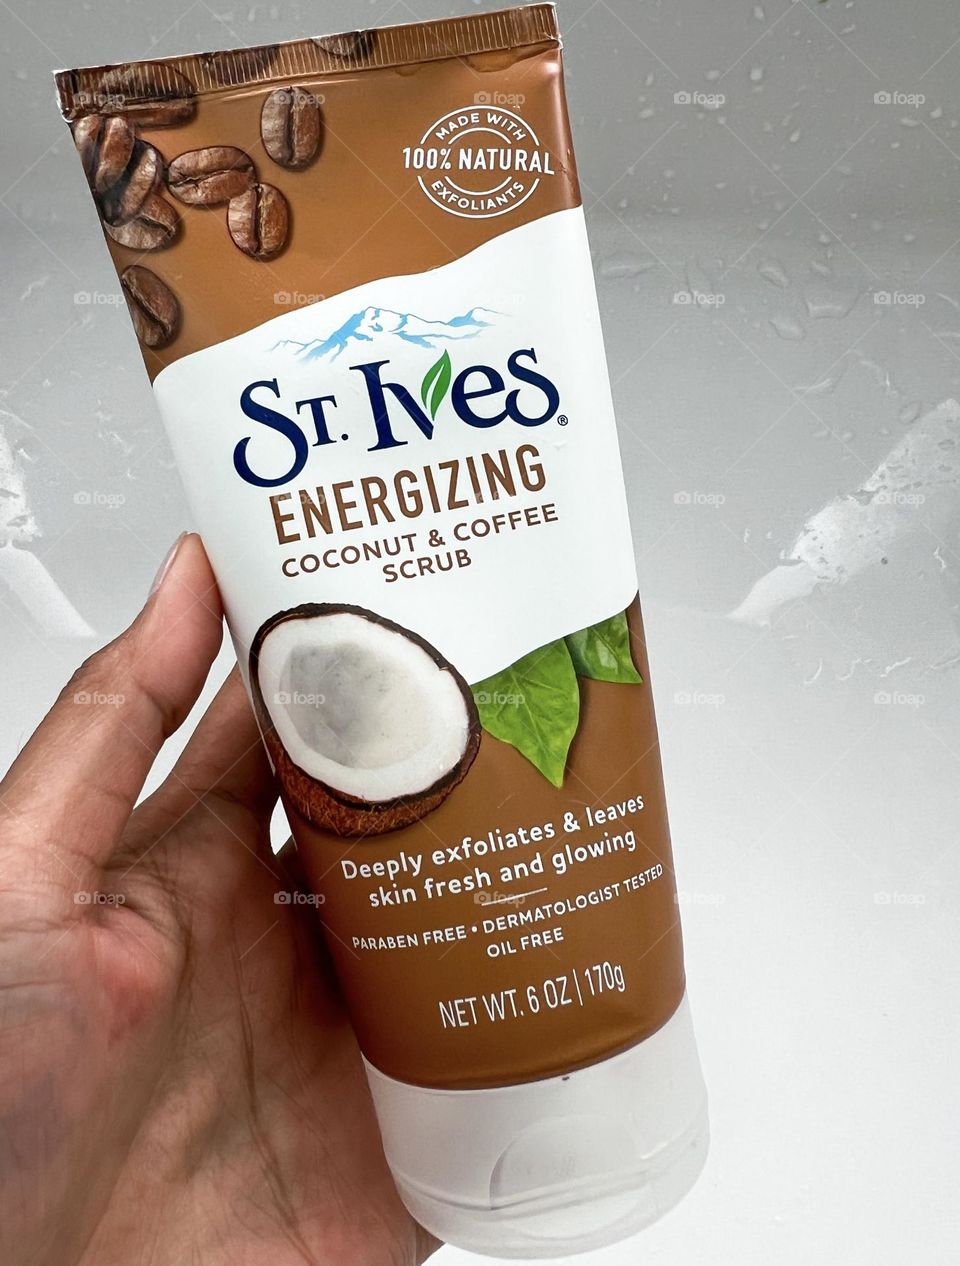 St. Ives energizing coconut and coffee scrub with white background.